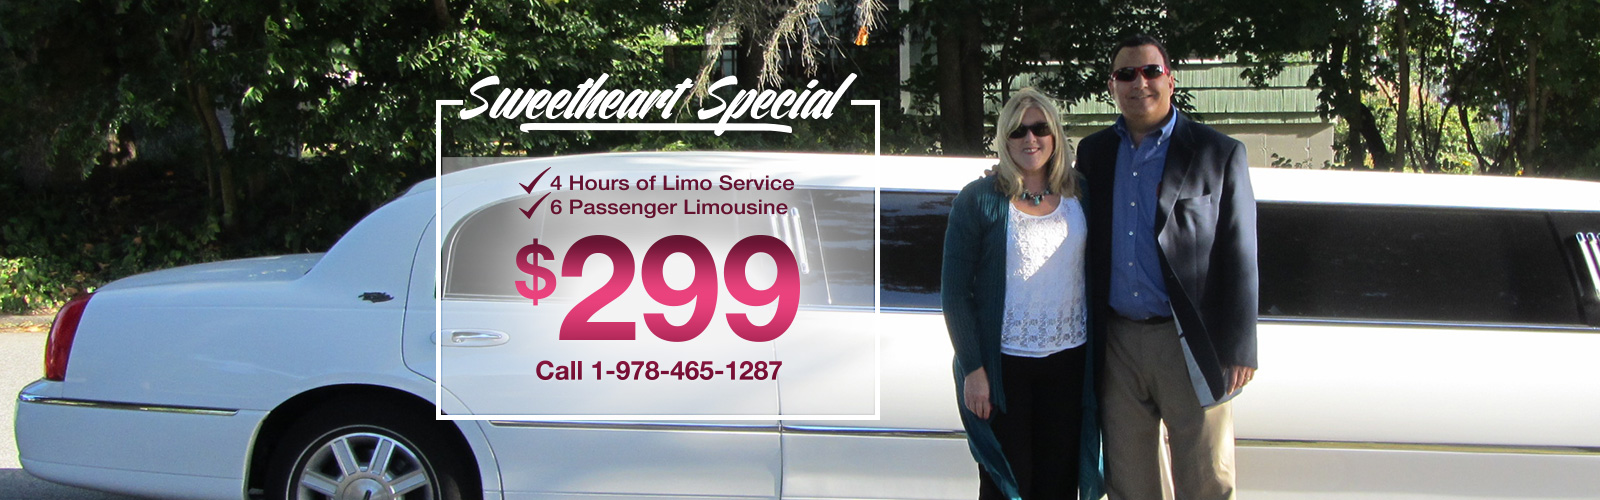 Sweetheart Special - Limousine Deals in Boston